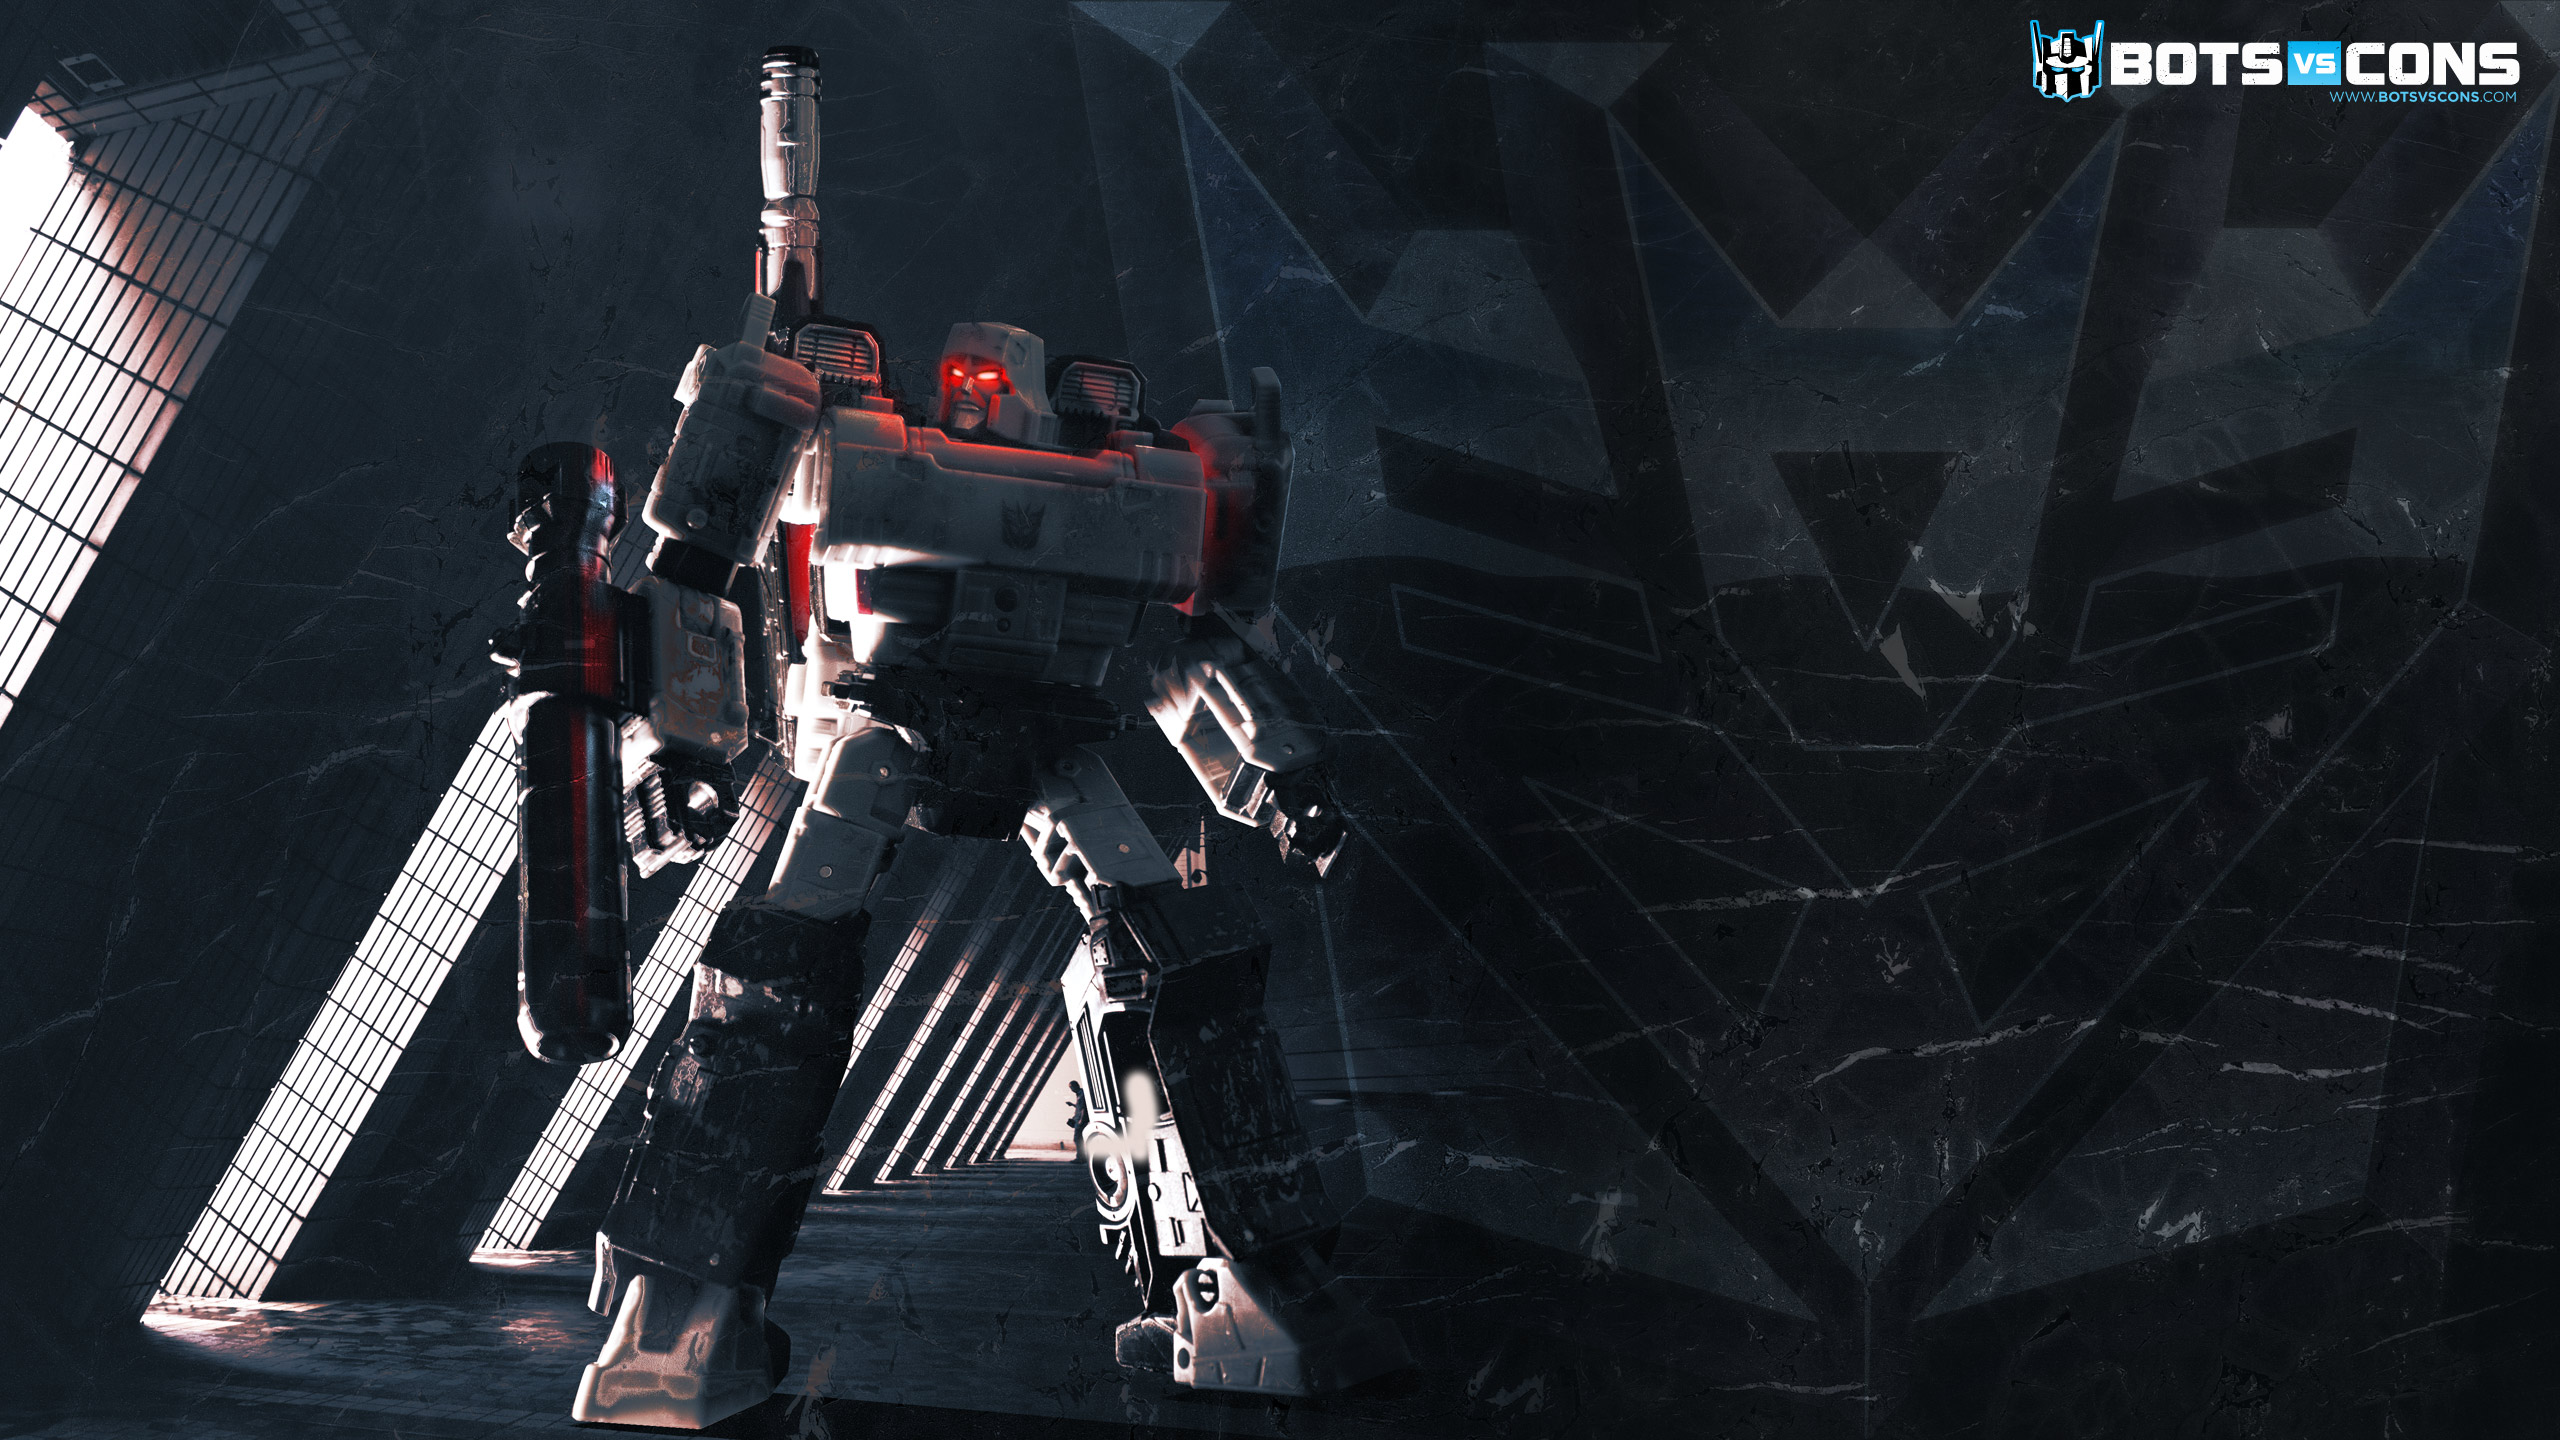 transformers wallpaper,action adventure game,mecha,pc game,fictional character,action figure